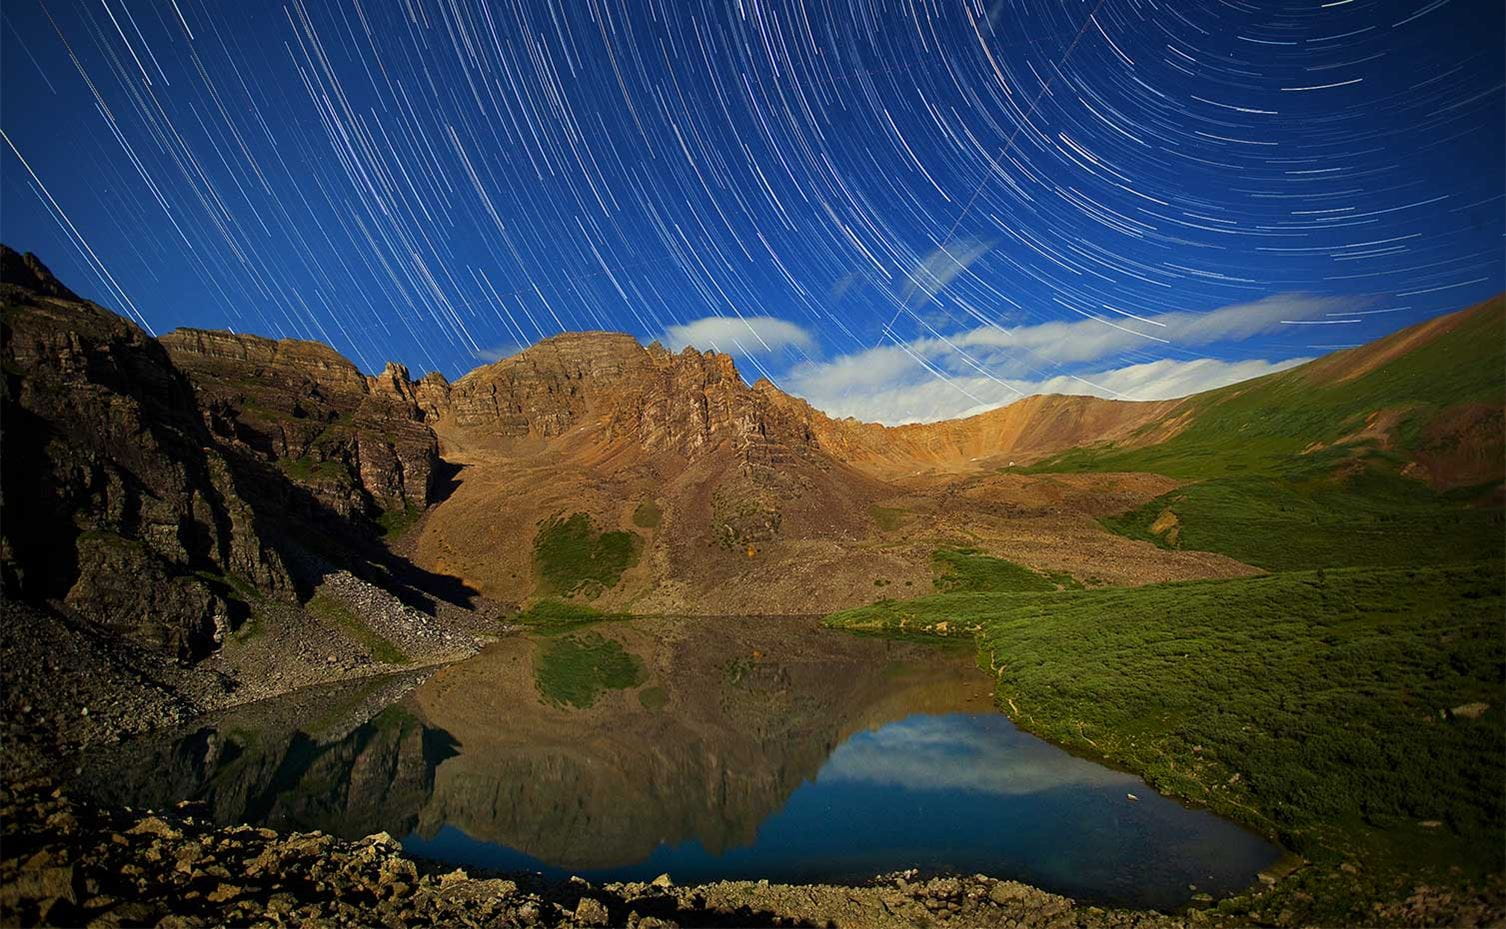 Star trails over a mountain lake in Colorado